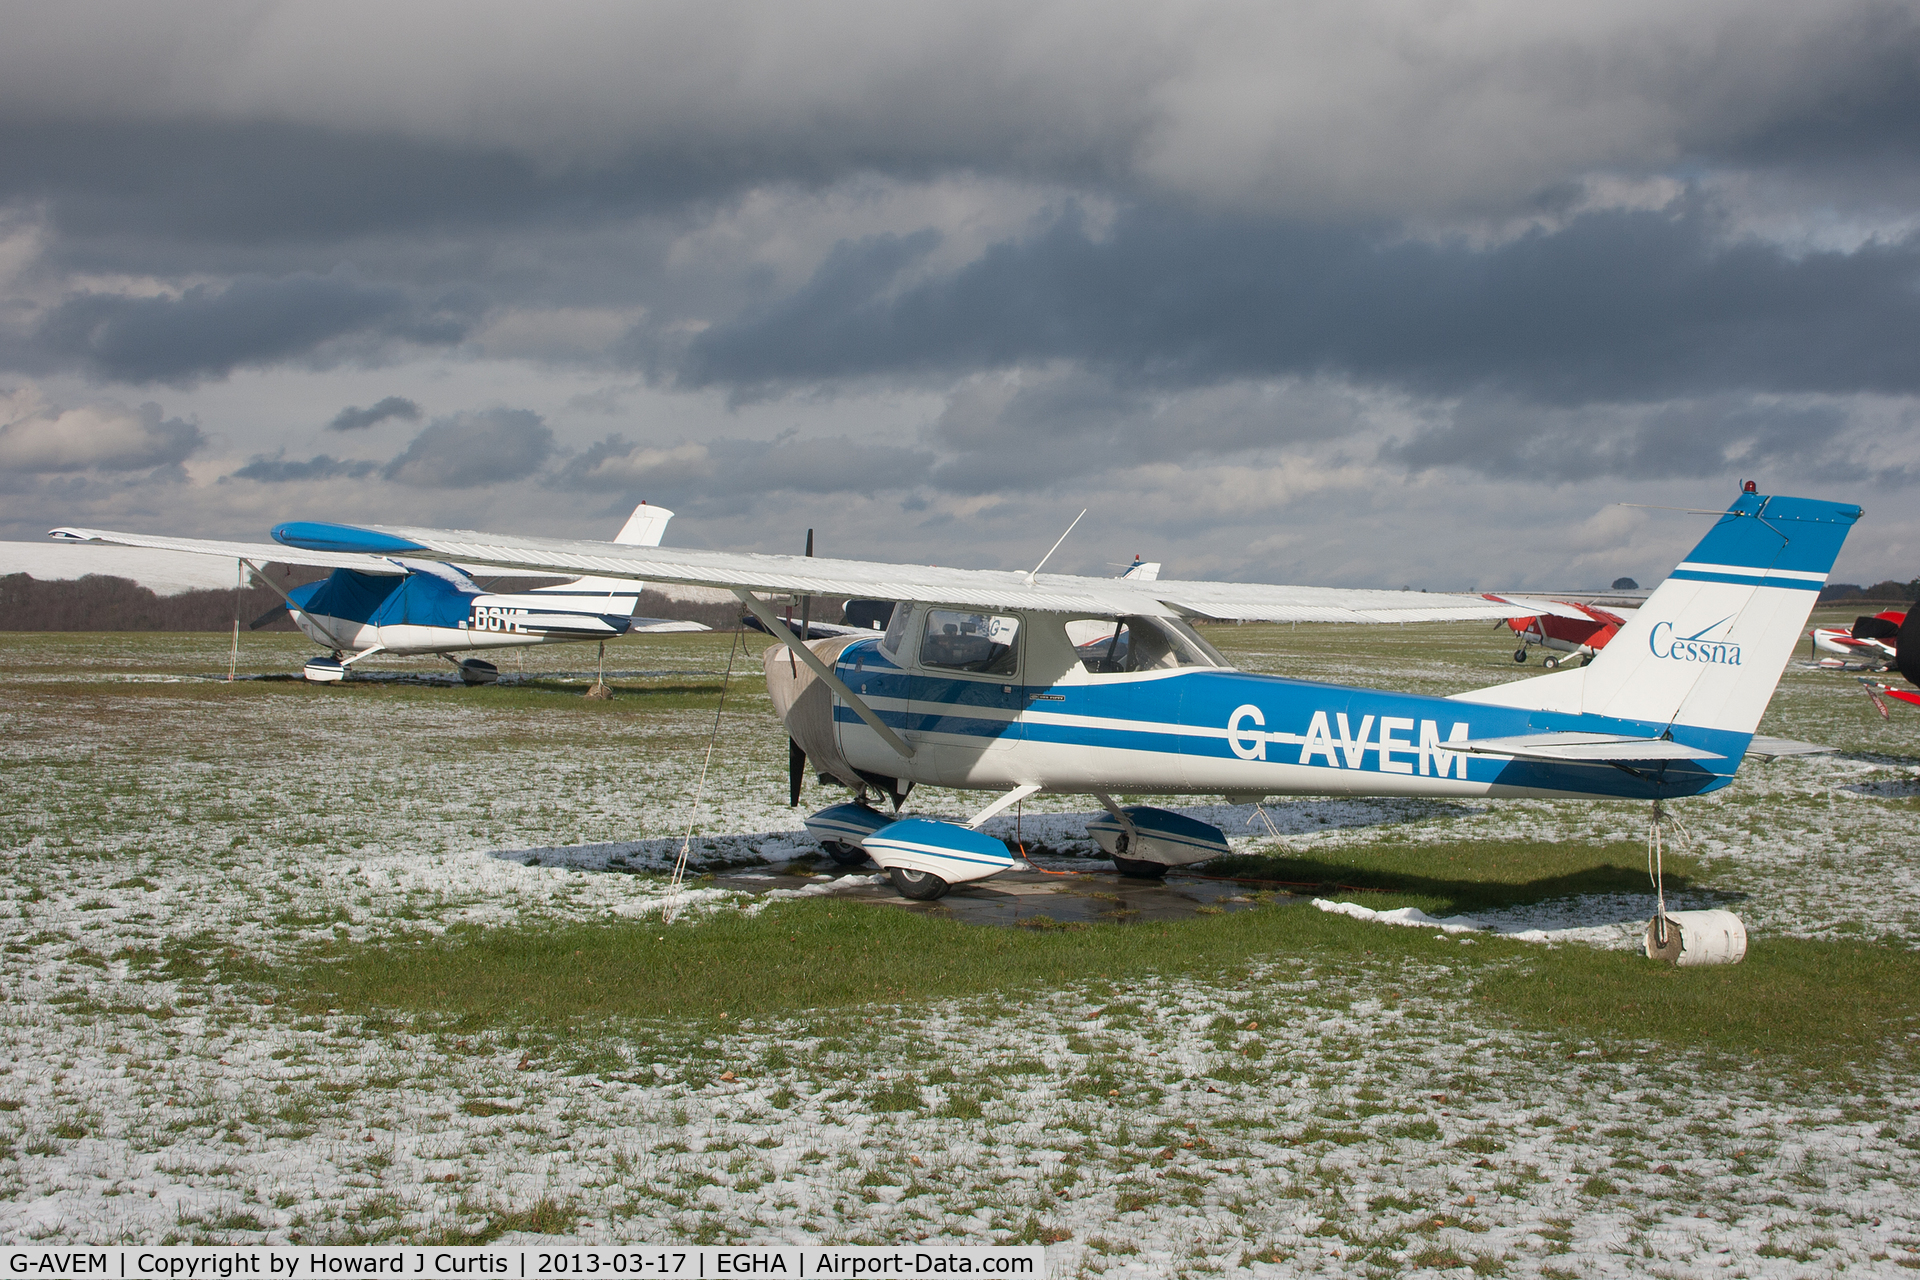 G-AVEM, 1966 Reims F150G C/N 0198, Compton Abbas in the snow. Resident Cessna G-AVEM and G-DOVE (left).